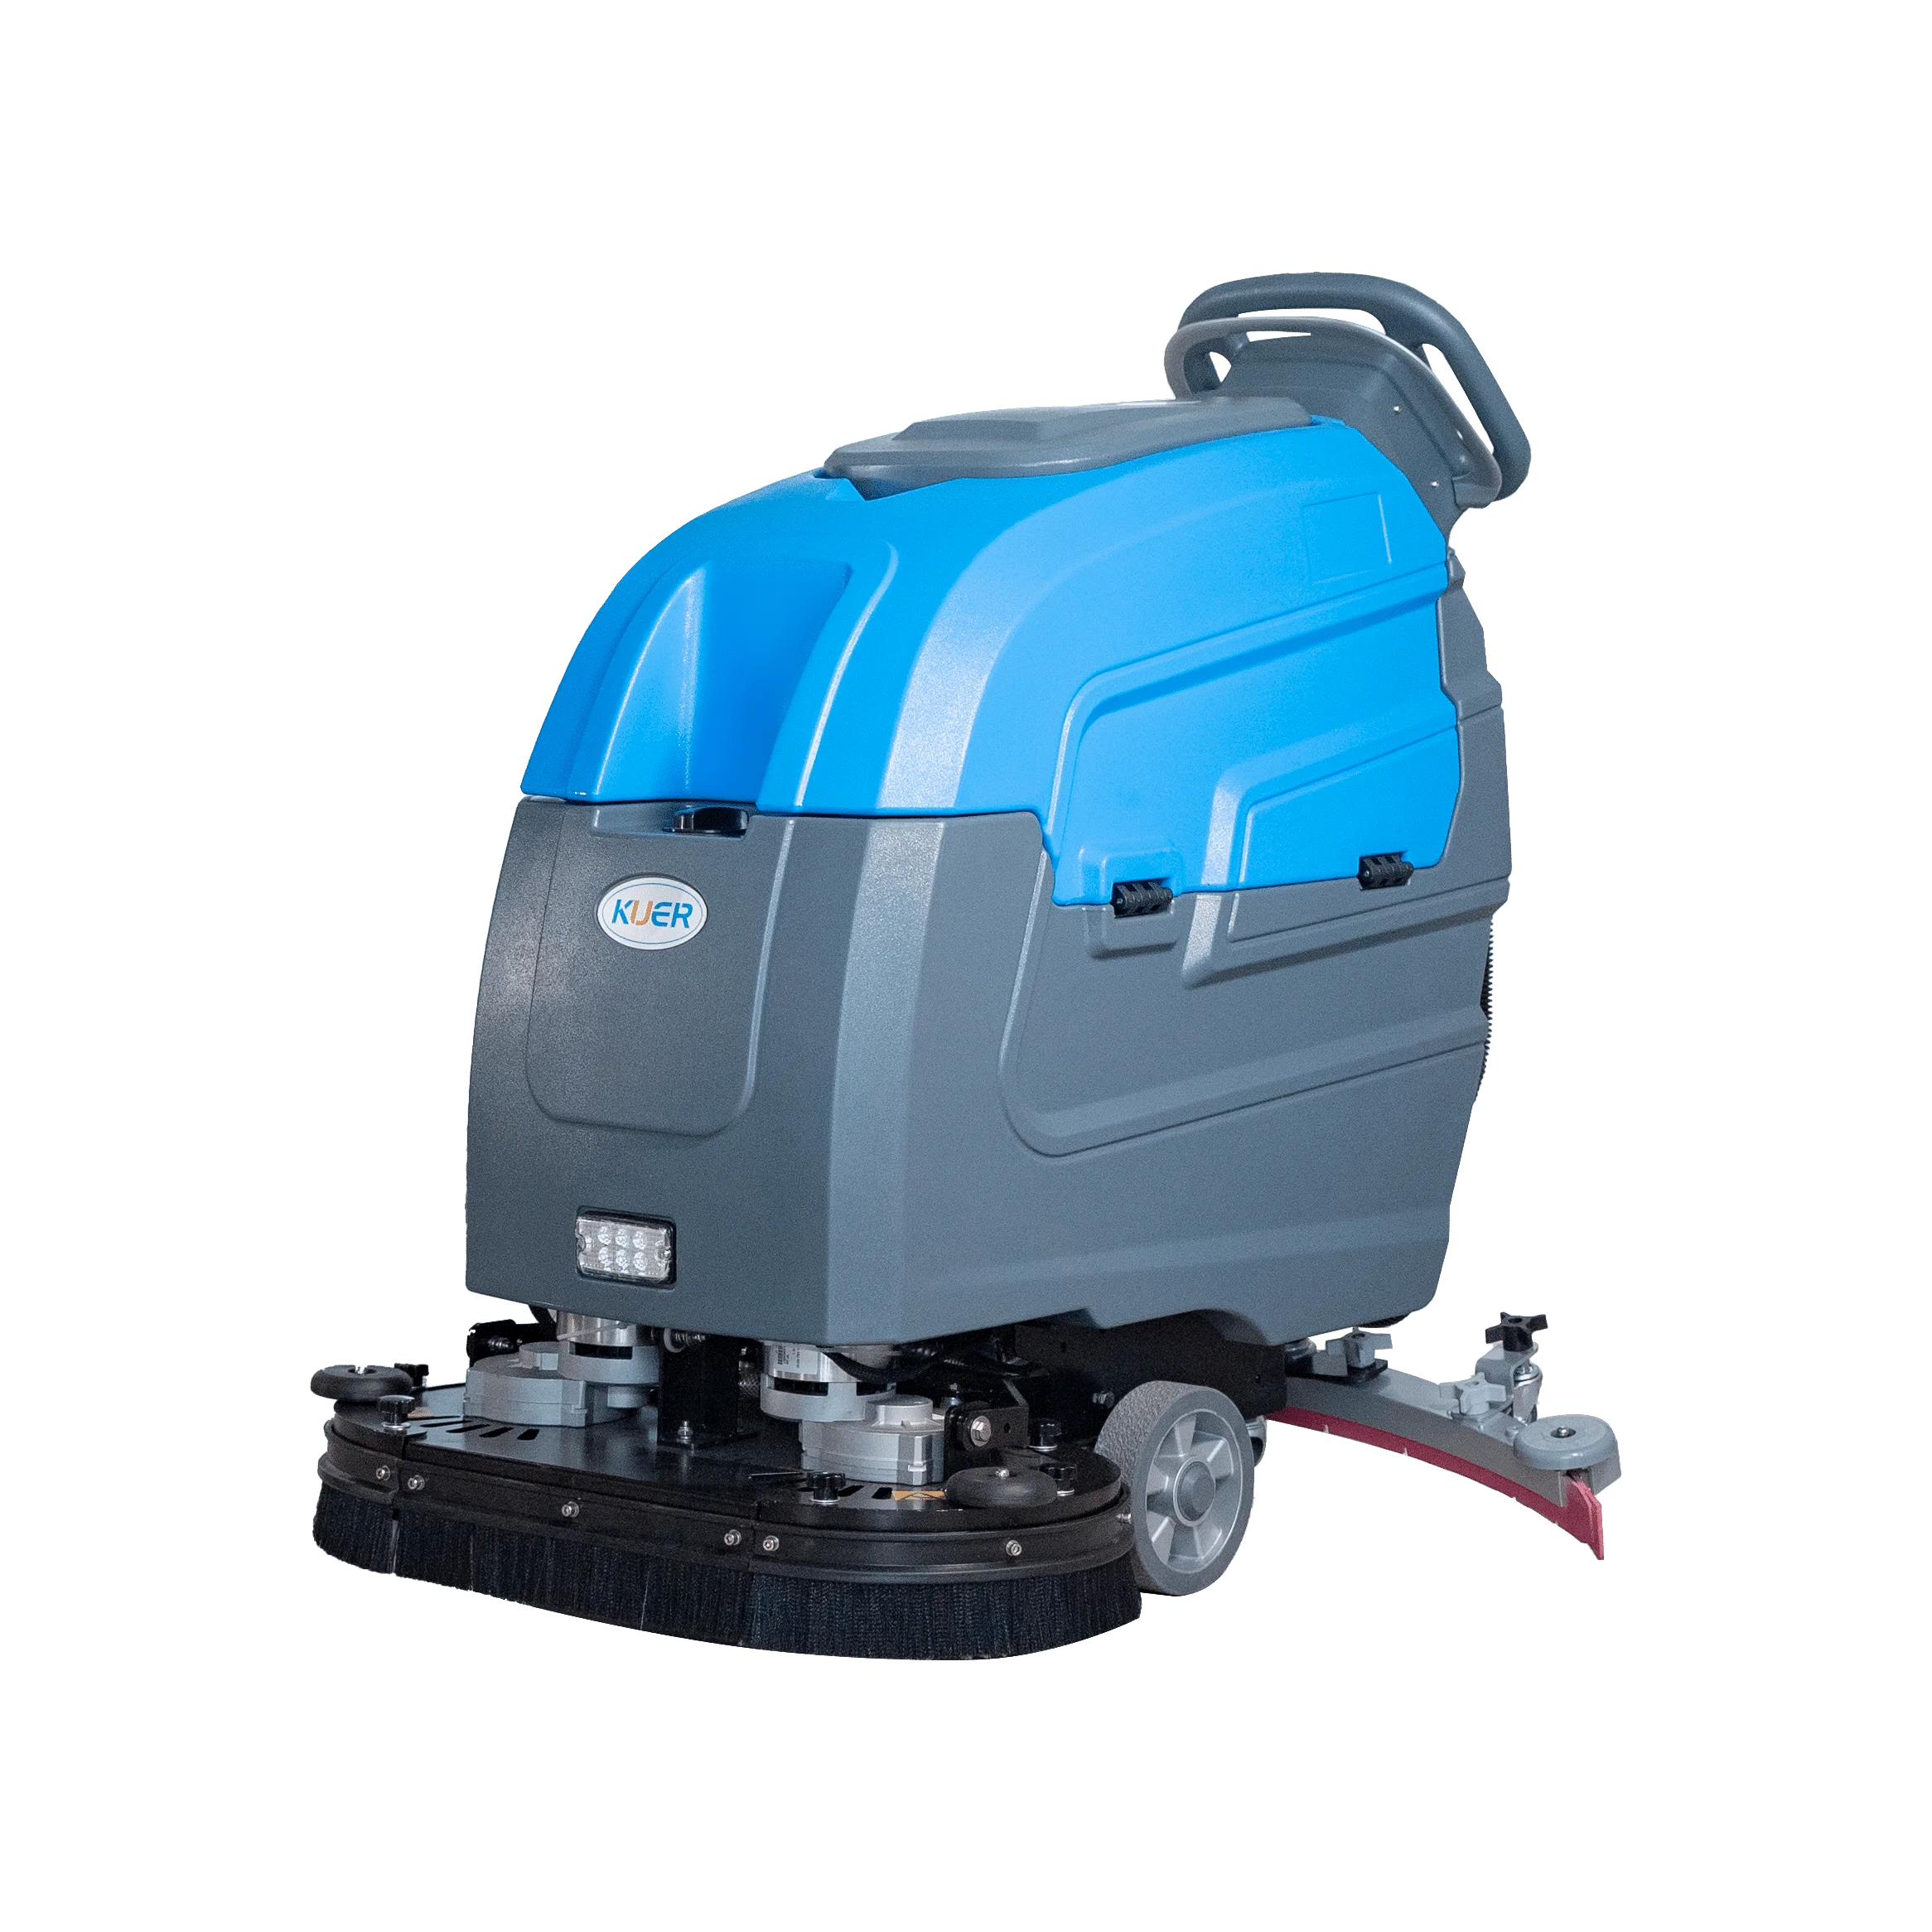 KUER 13″ Double brush Self-propelled Floor Scrubber Machine with Battery | KR-H75 32,290 ft²/hr